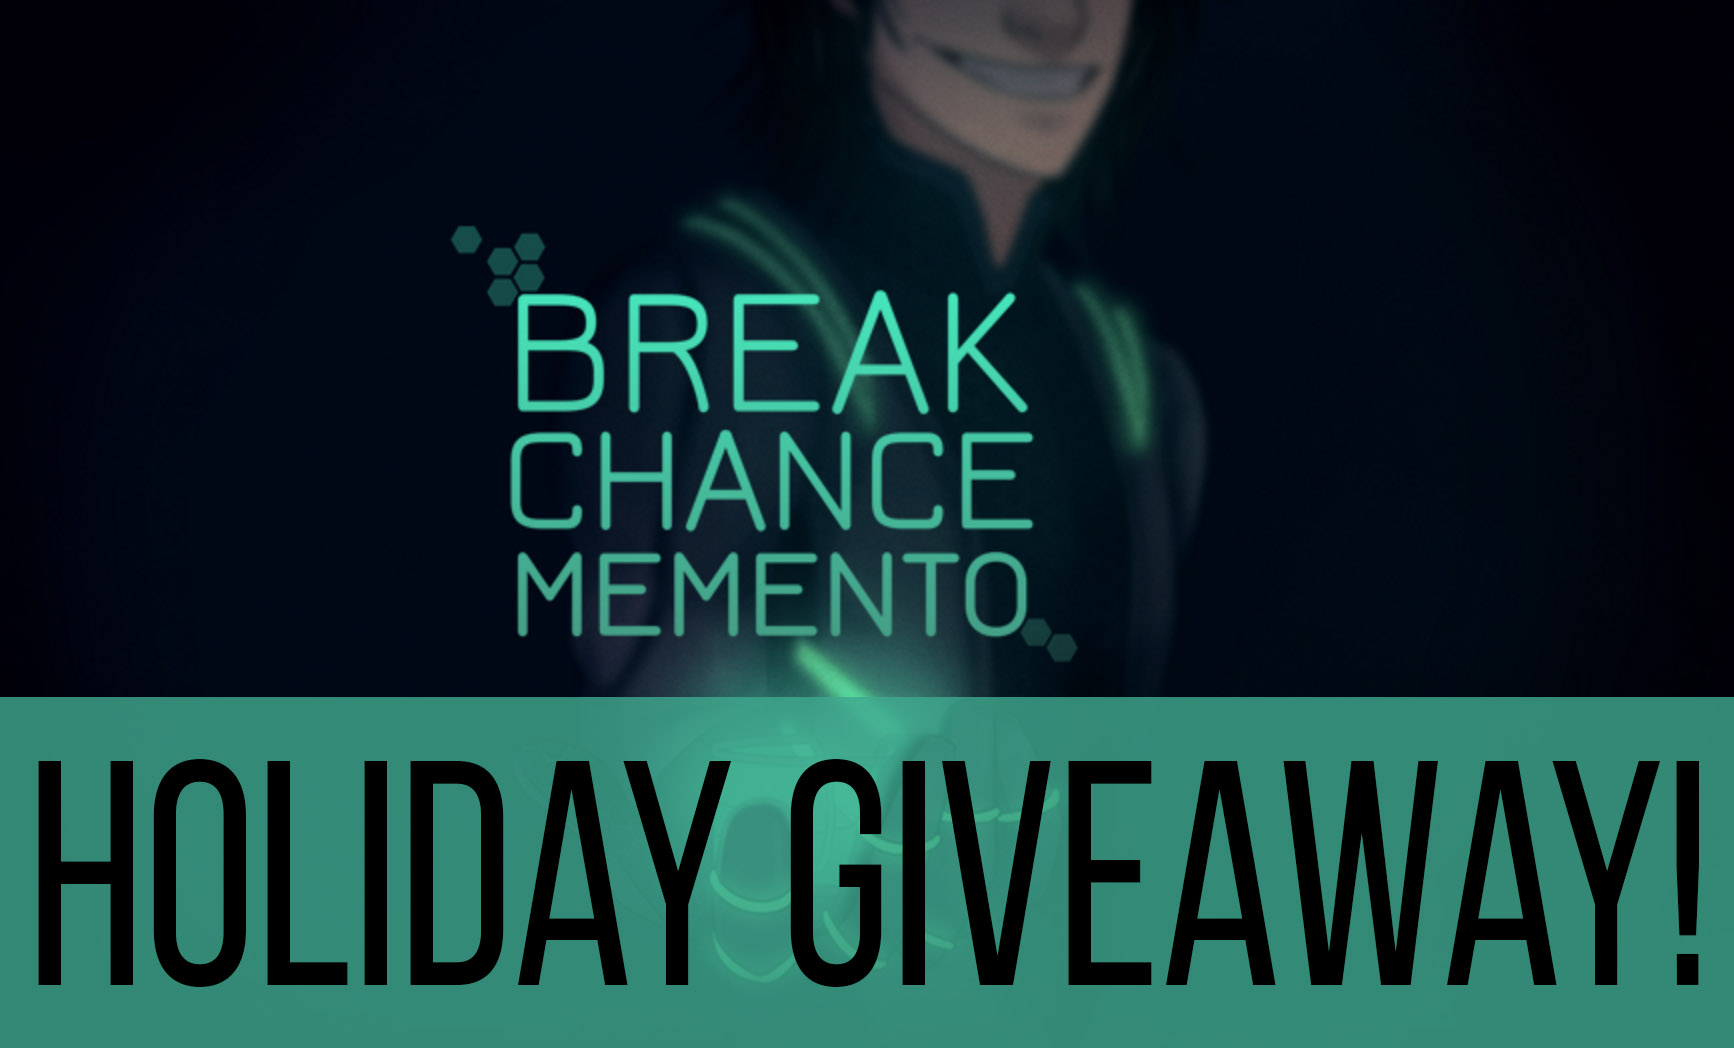 Break Chance Memento Chic Pixel Holiday Giveaway